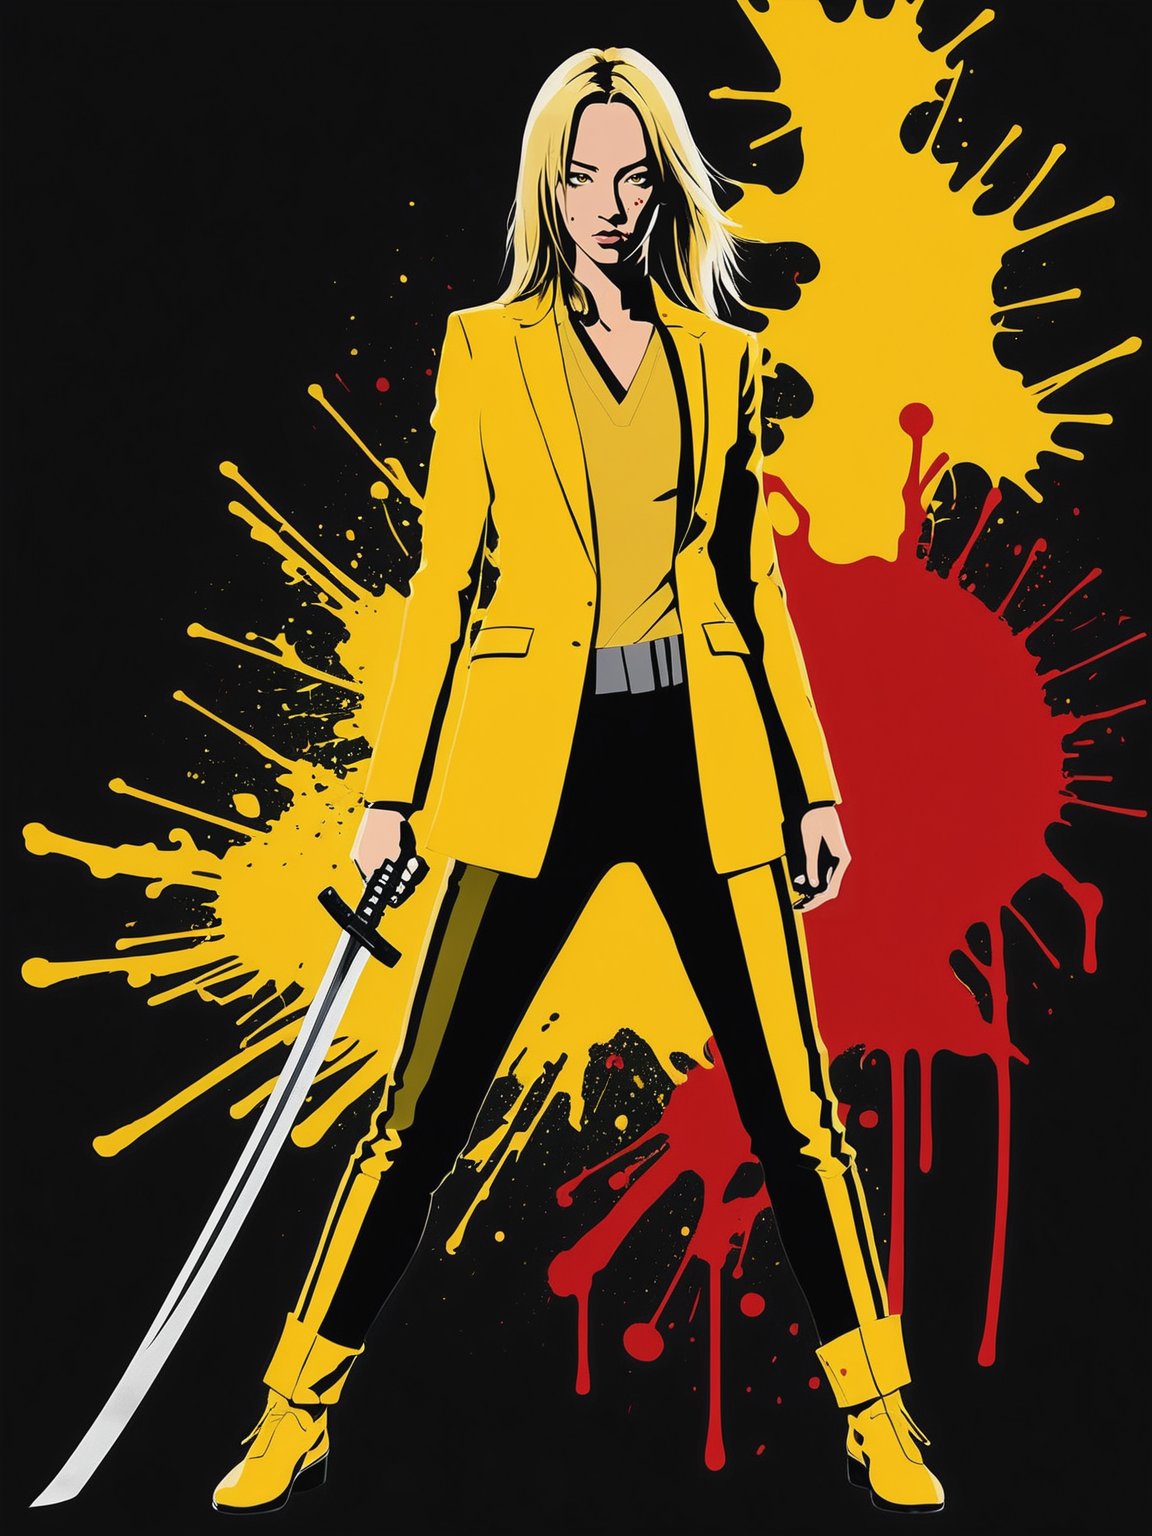 cool yellow illustration of kill bill with ONE SINGLE katana and some blood splatter, black silhouette, shadow, movie poster